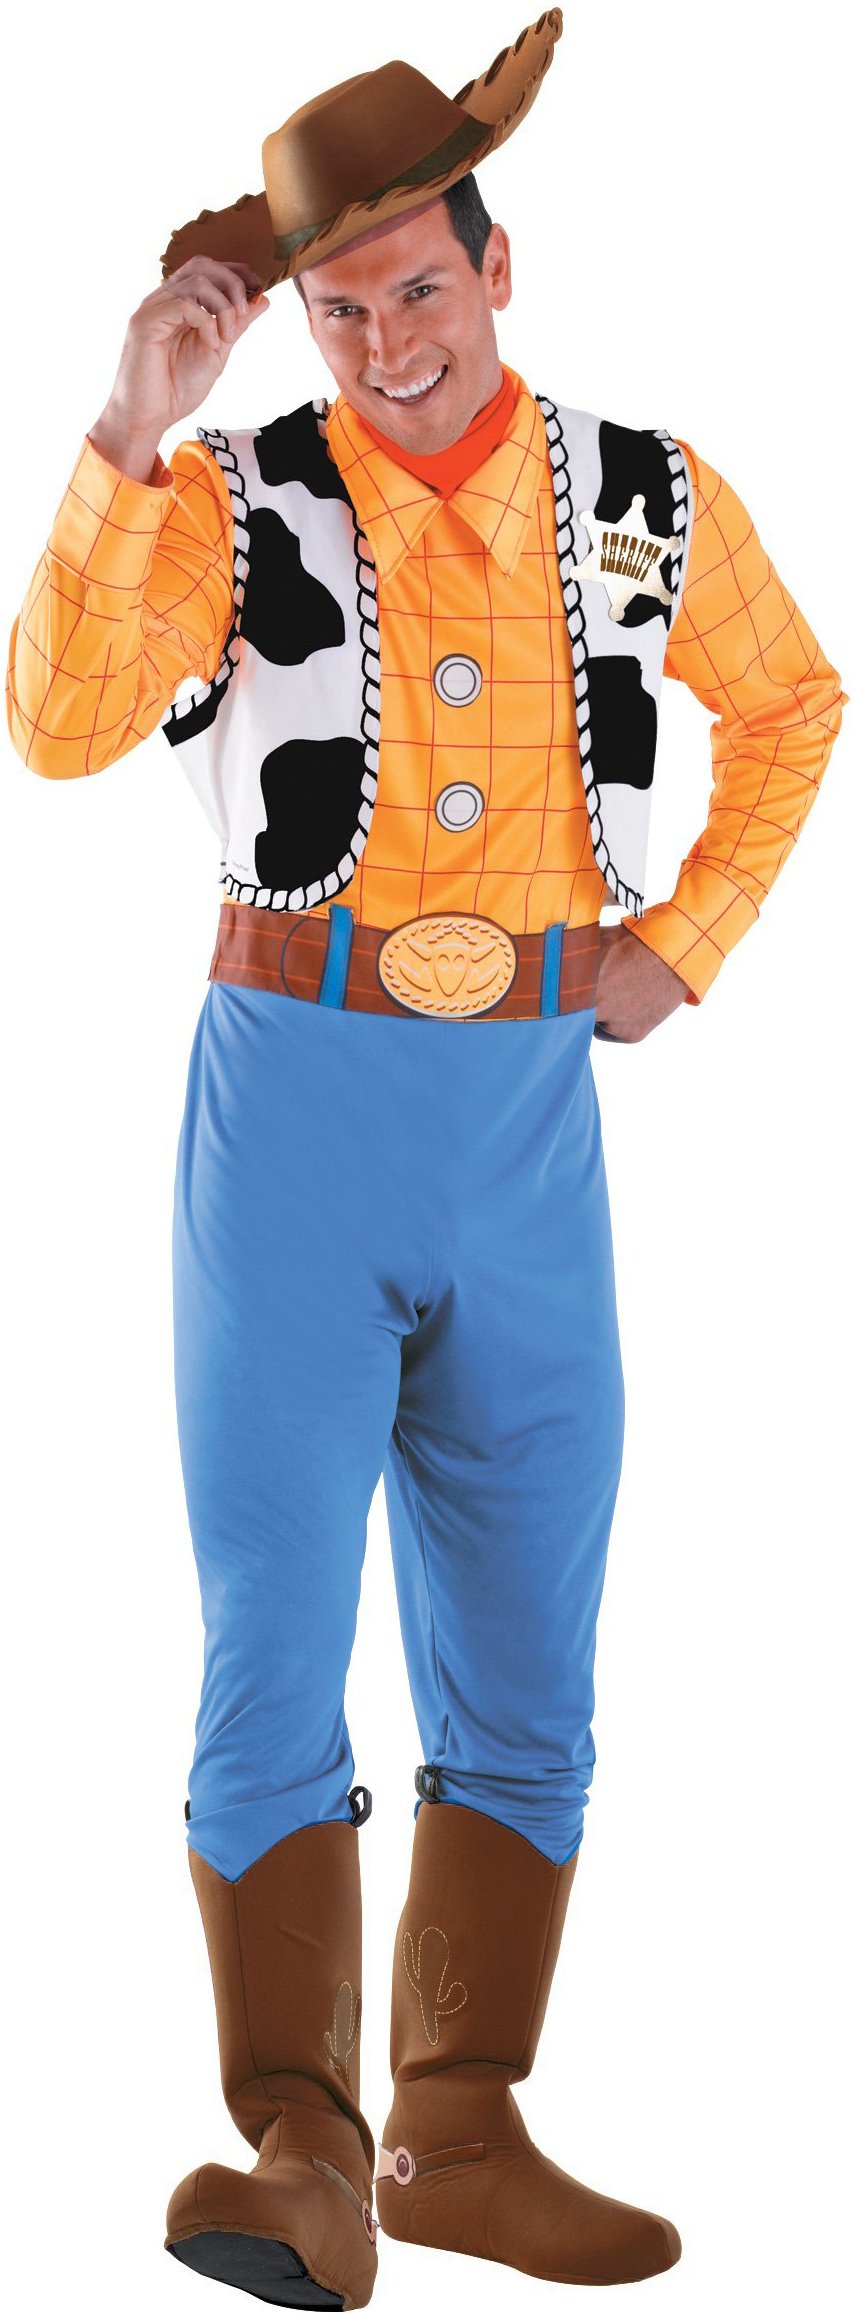 Toy Story - Woody Deluxe Adult Costume